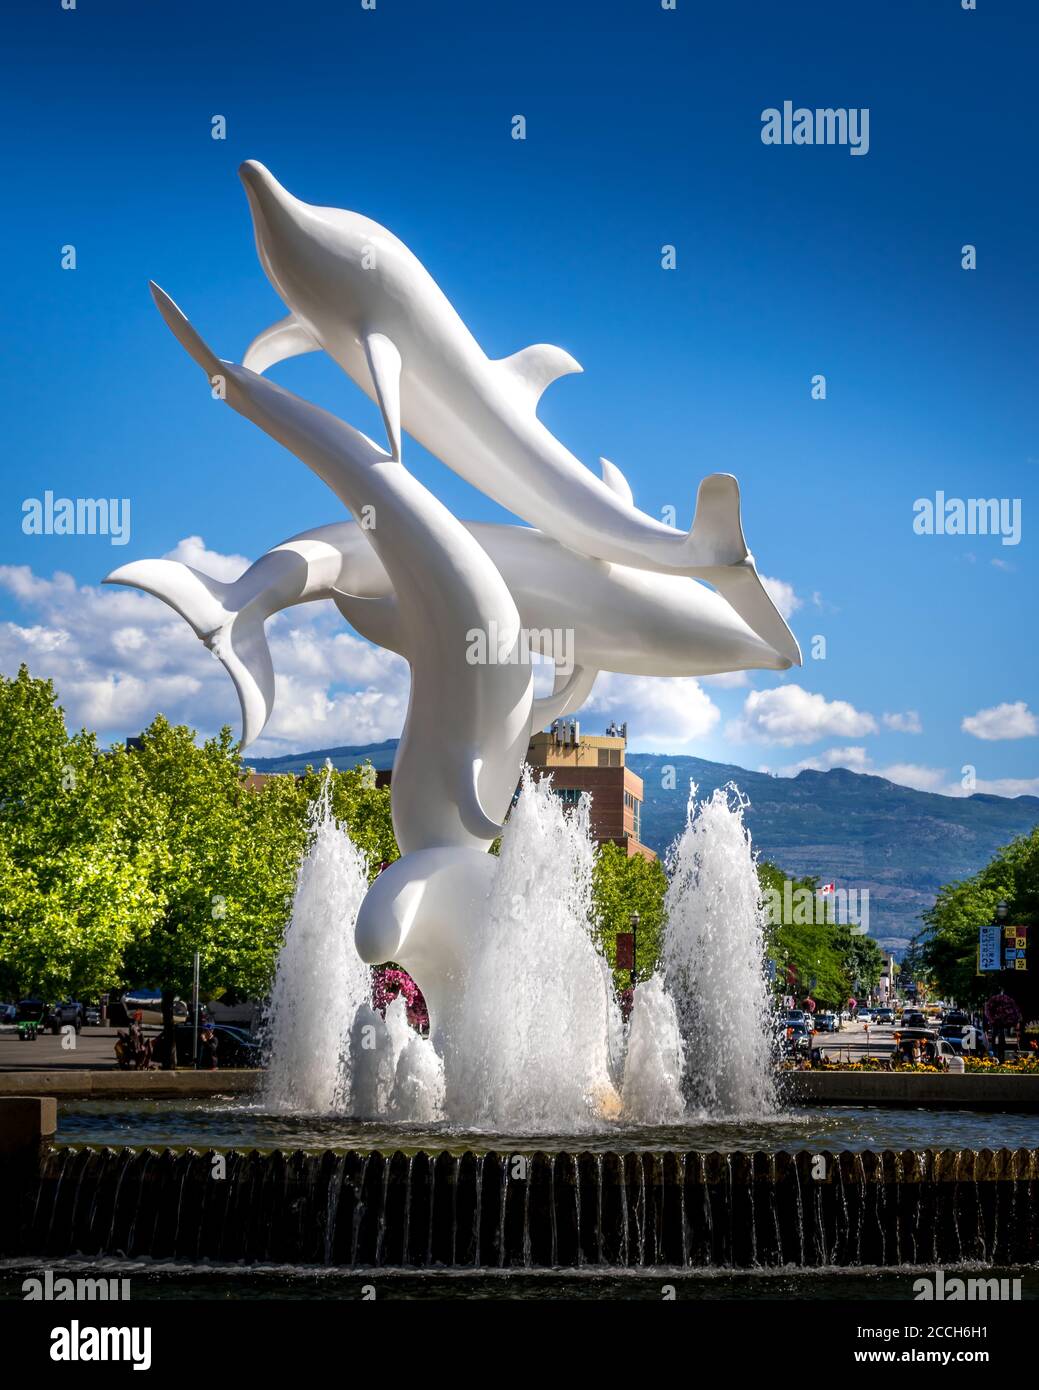 Rhapsody, a group of Fiberglass Dolphins, in a Fountain at Rhapsody Plaza in the city of Kelowna Stock Photo